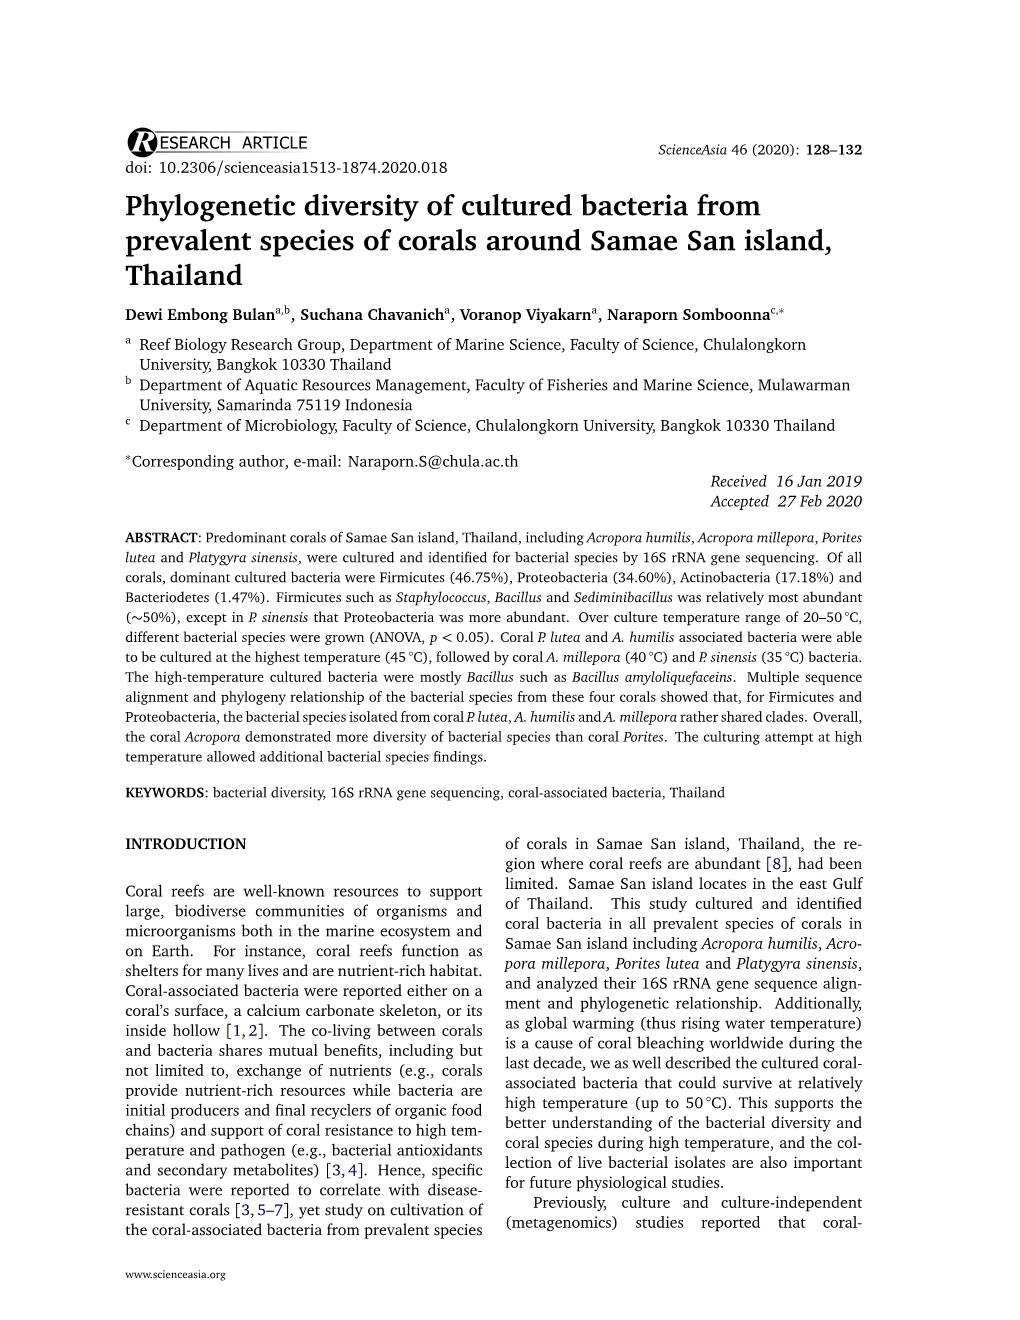 Phylogenetic Diversity of Cultured Bacteria from Prevalent Species of Corals Around Samae San Island, Thailand